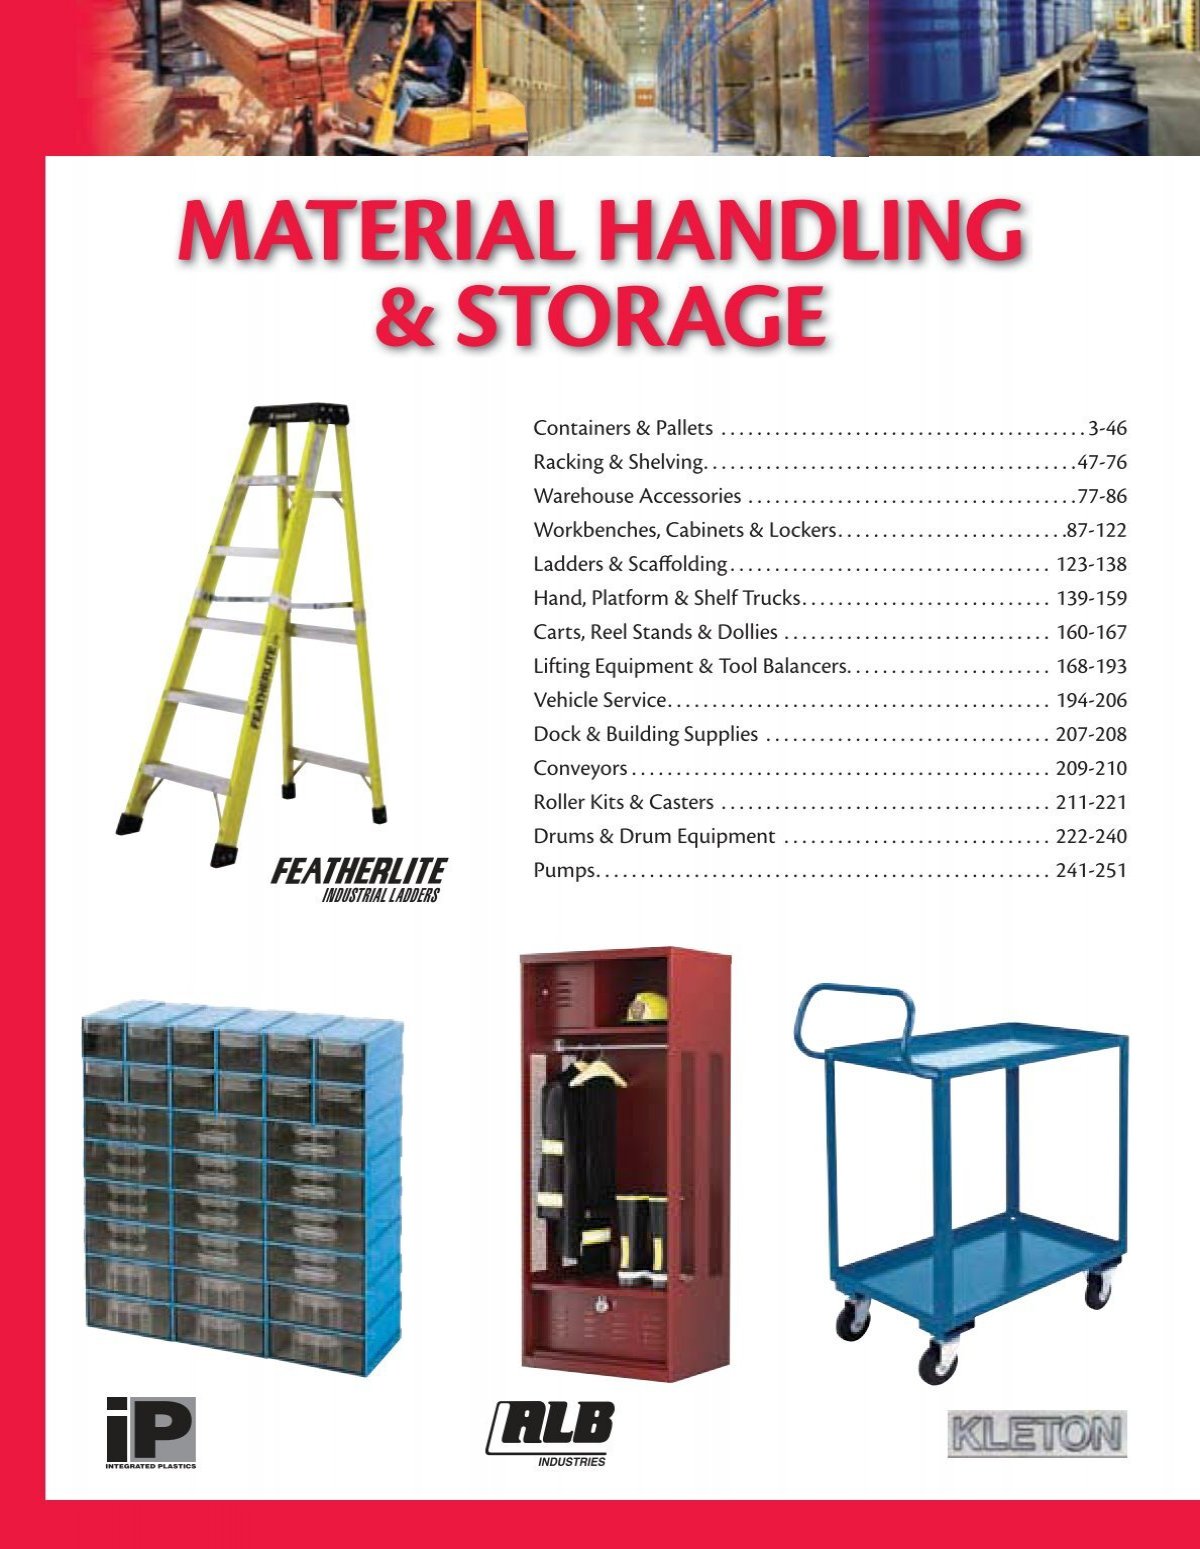 MATERIAL HANDLING & STORAGE - NS Local